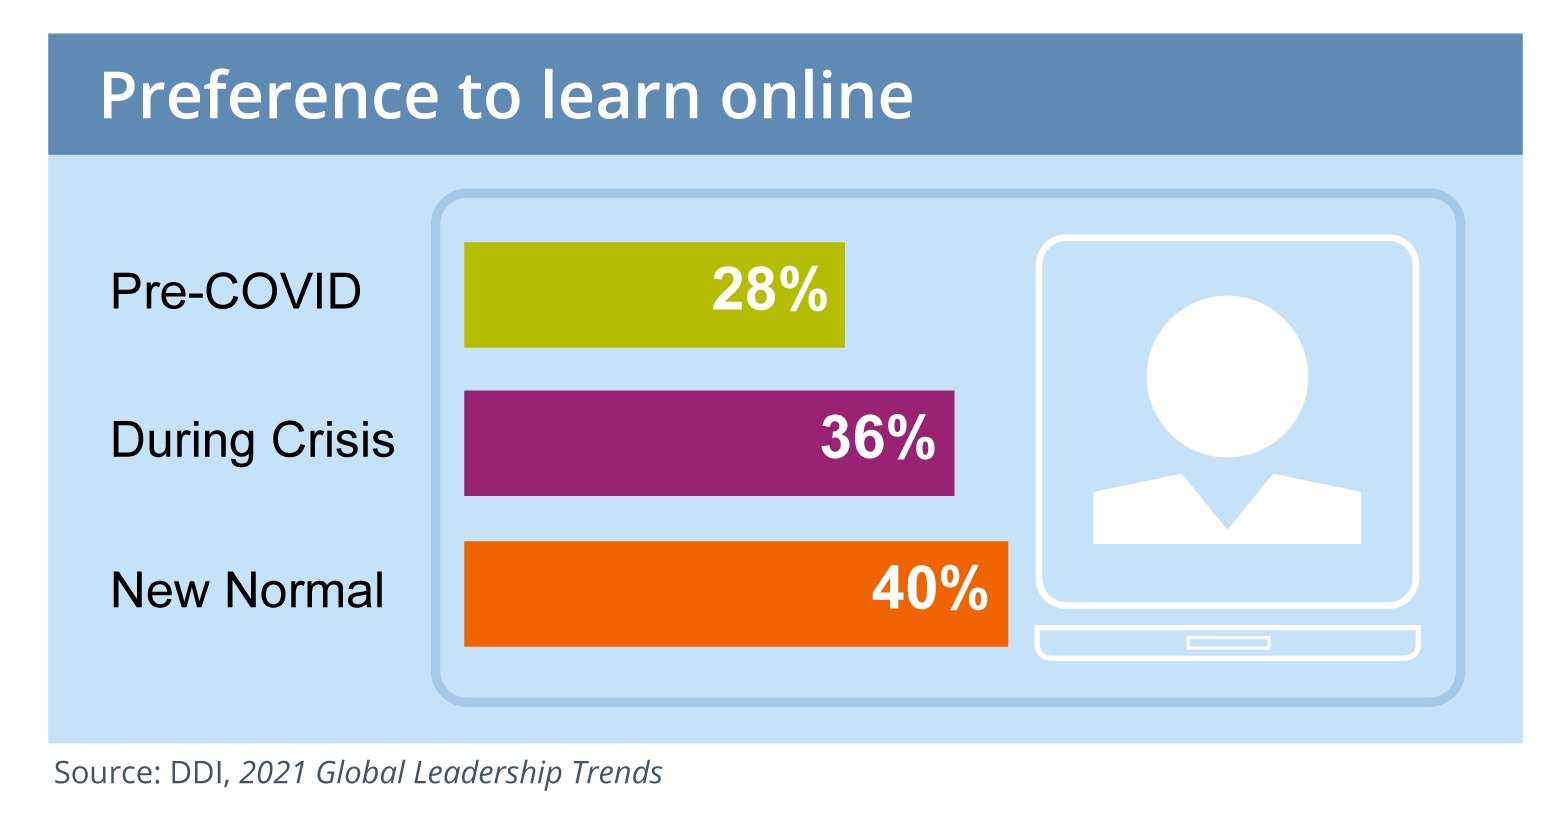 bar graph of leaders' preferences to learn online precovid (28%), during crisis (36%), and new normal (40%) according to DDI's 2021 Global Leadership Trends report